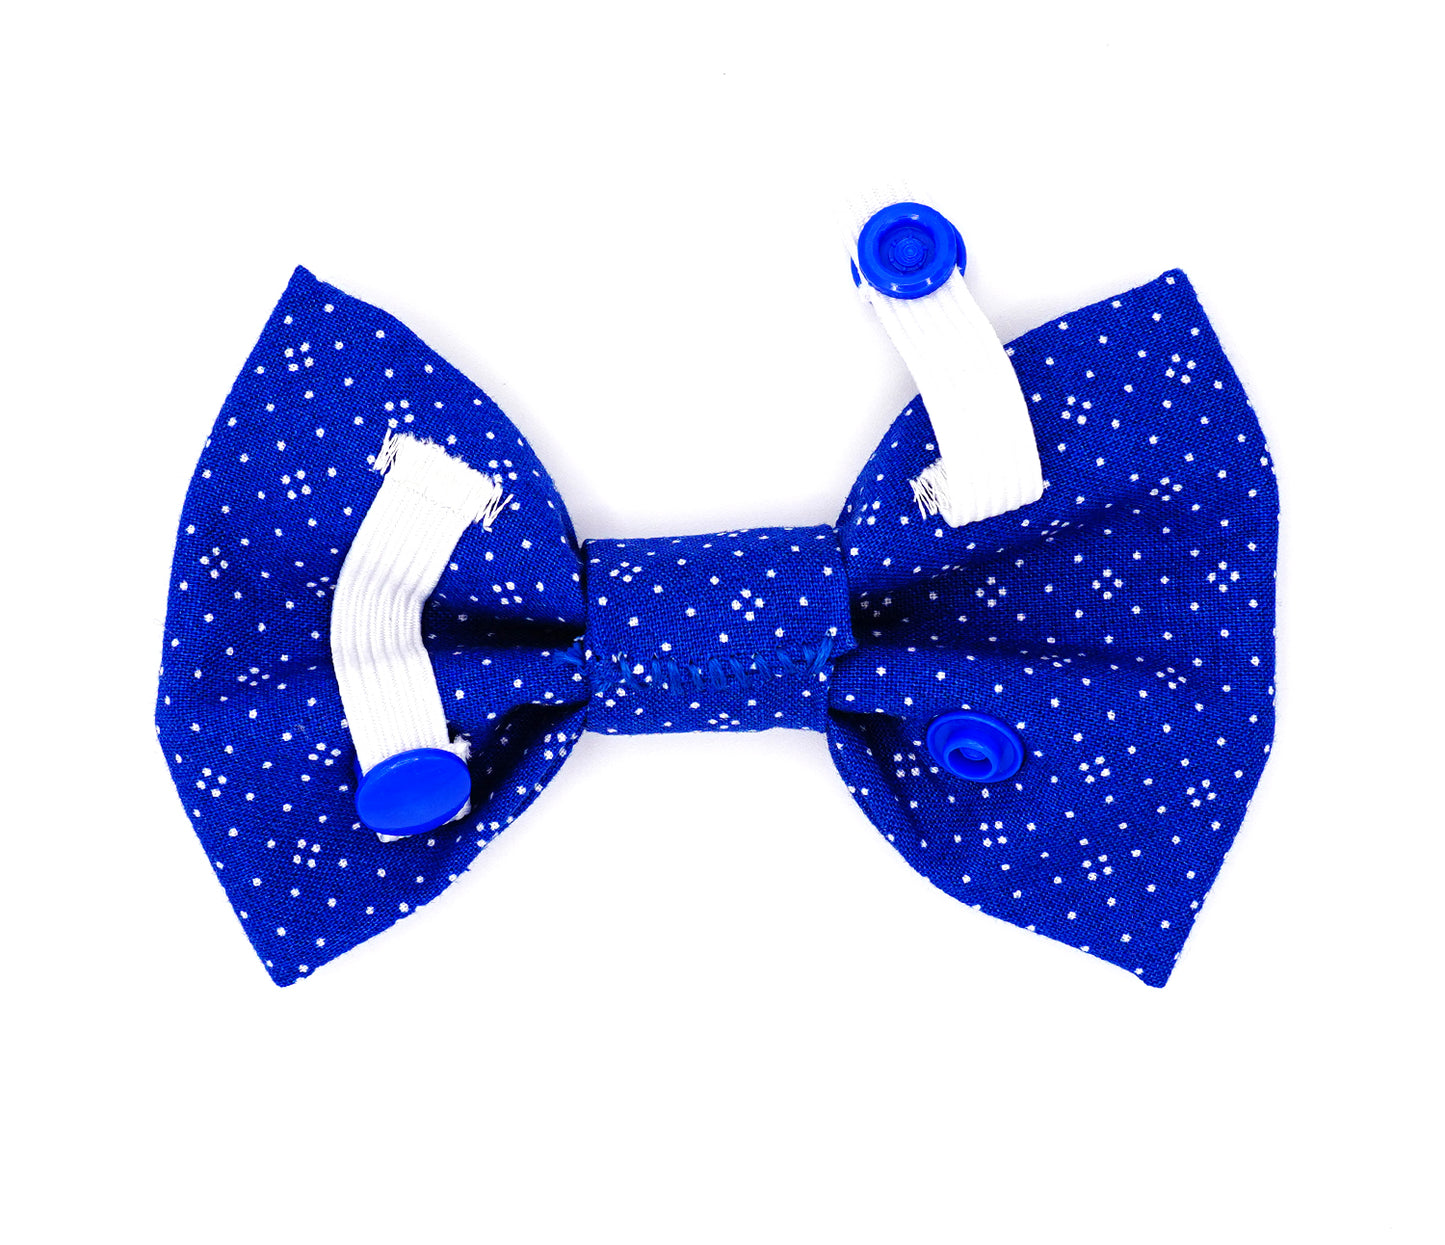 Handmade cotton bow tie for dogs (or other pets). Elastic straps on back with snaps make it easy to add to collar, harness, or leash. Medium blue background with a pattern of white dots.